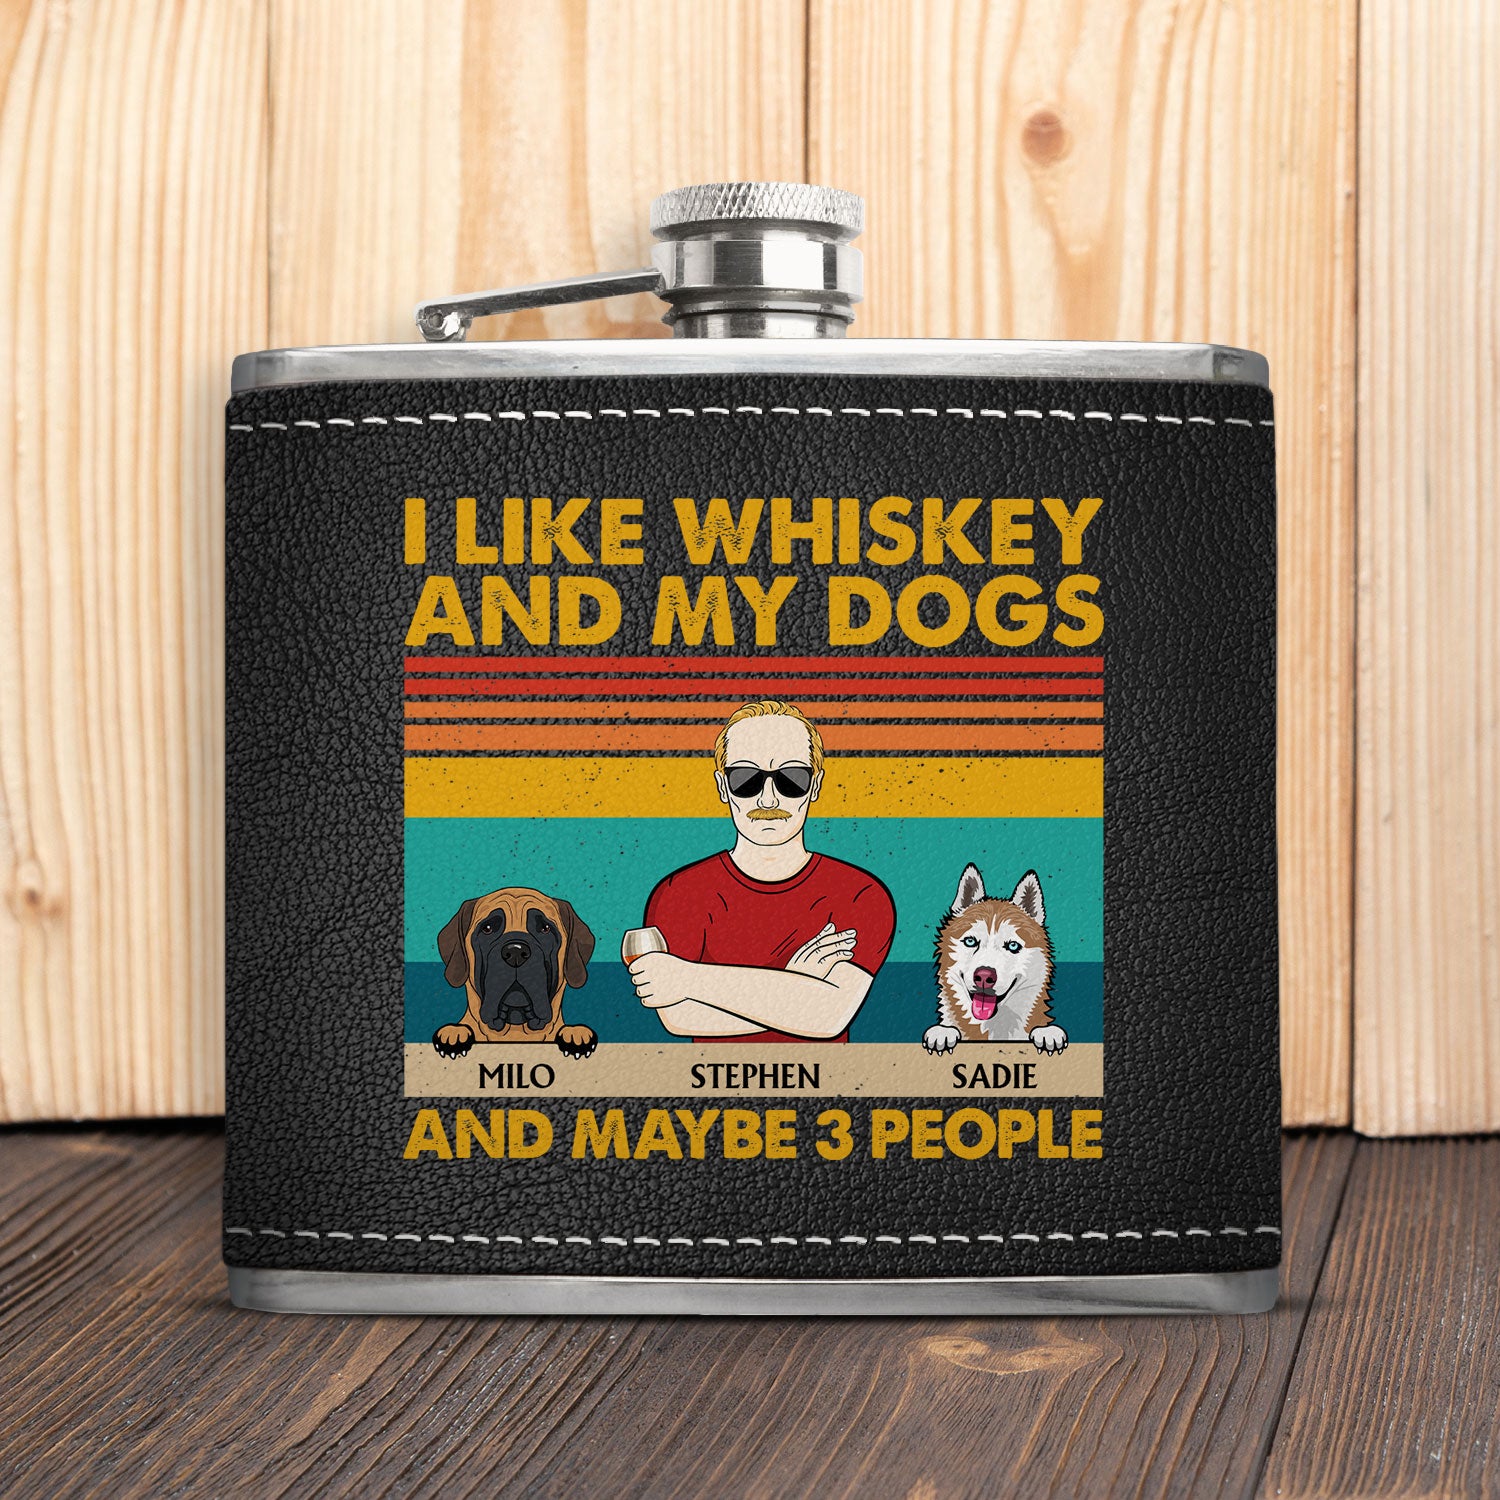 I Like Drink And My Dogs And Maybe 3 People - Birthday, Funny Gift For Father, Man, Dog Dad, Pet Lover - Personalized Hip Flask